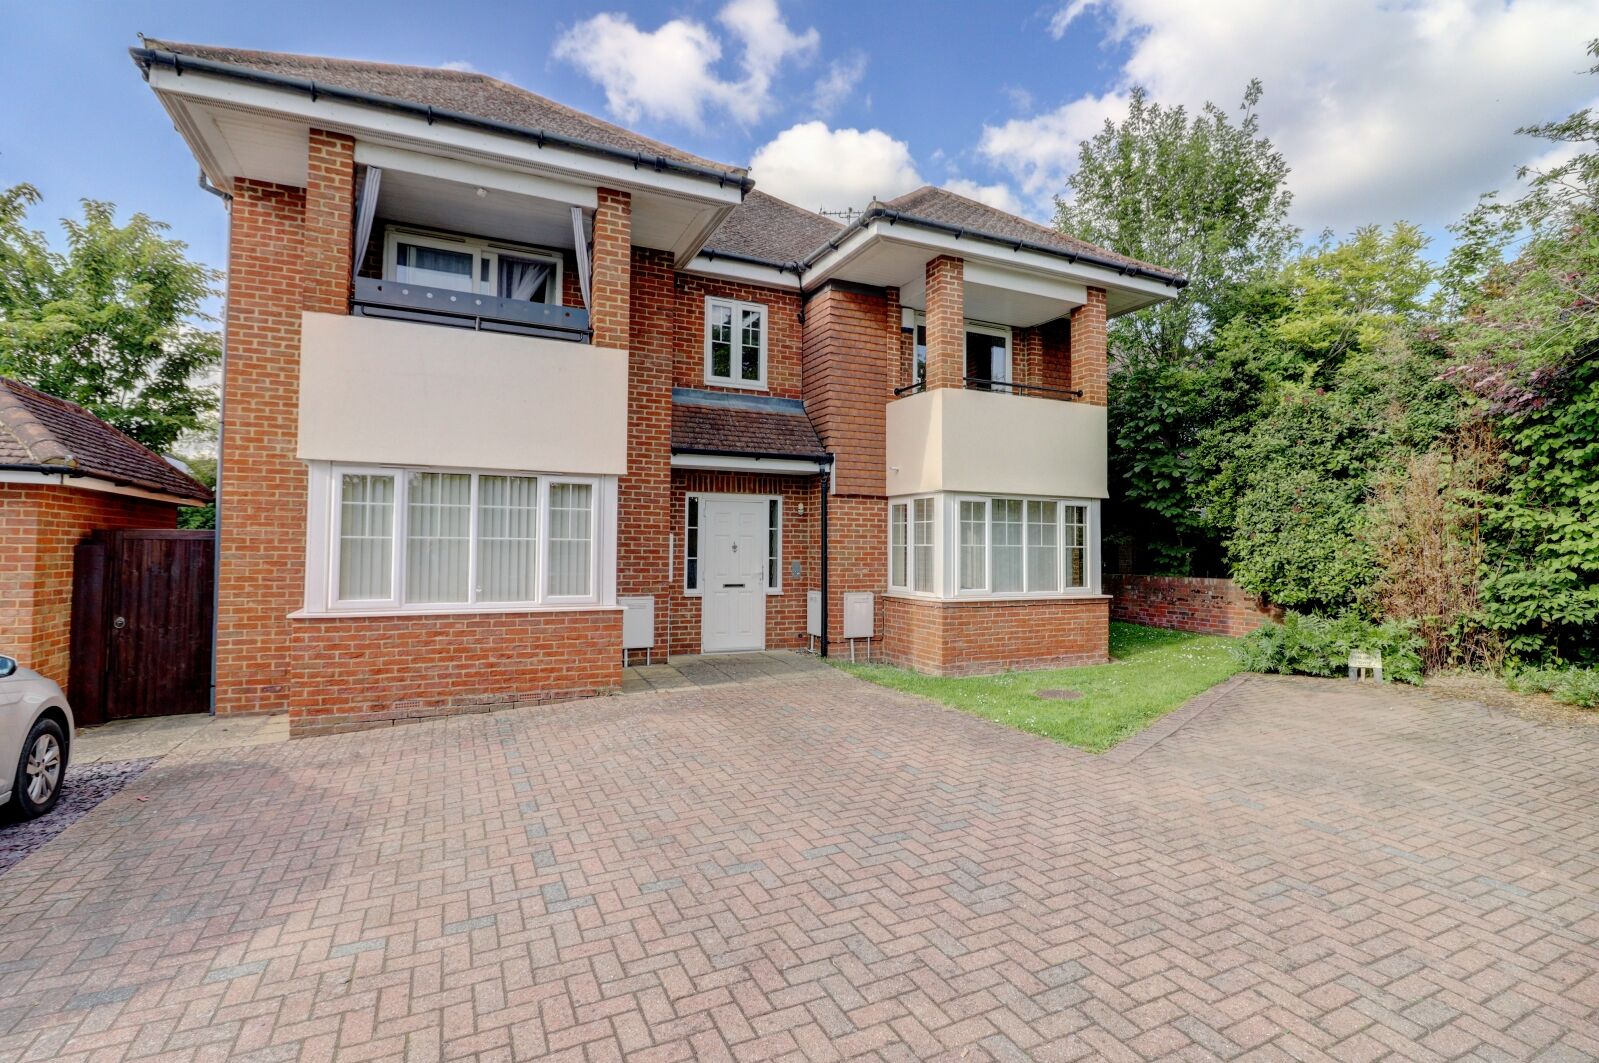 2 bedroom  flat for sale Hamilton Road, High Wycombe, HP13, main image